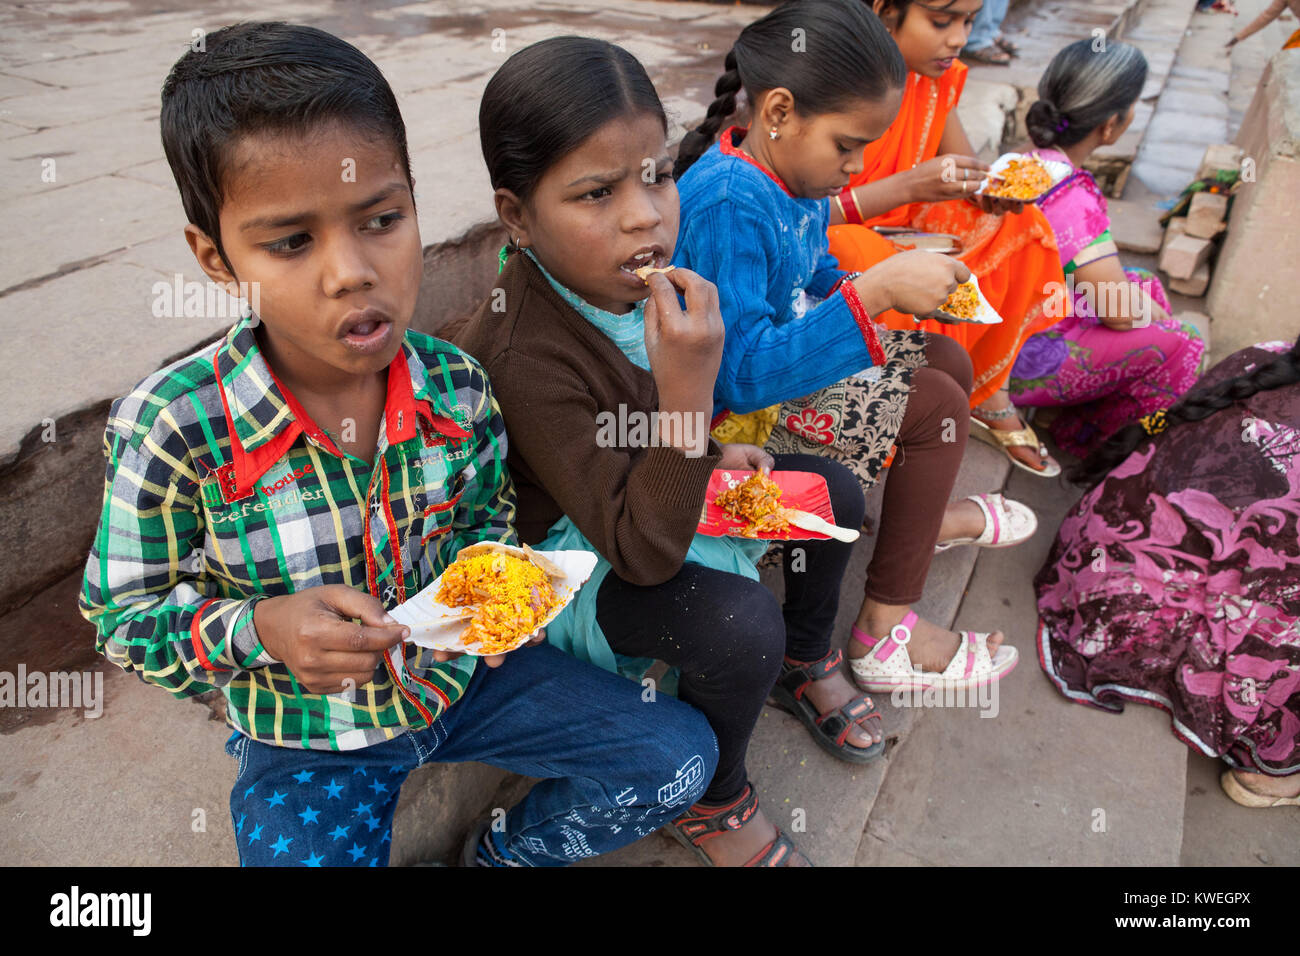 Children eat a snack of bhel puri on the ghats at Varanasi in India Stock Photo